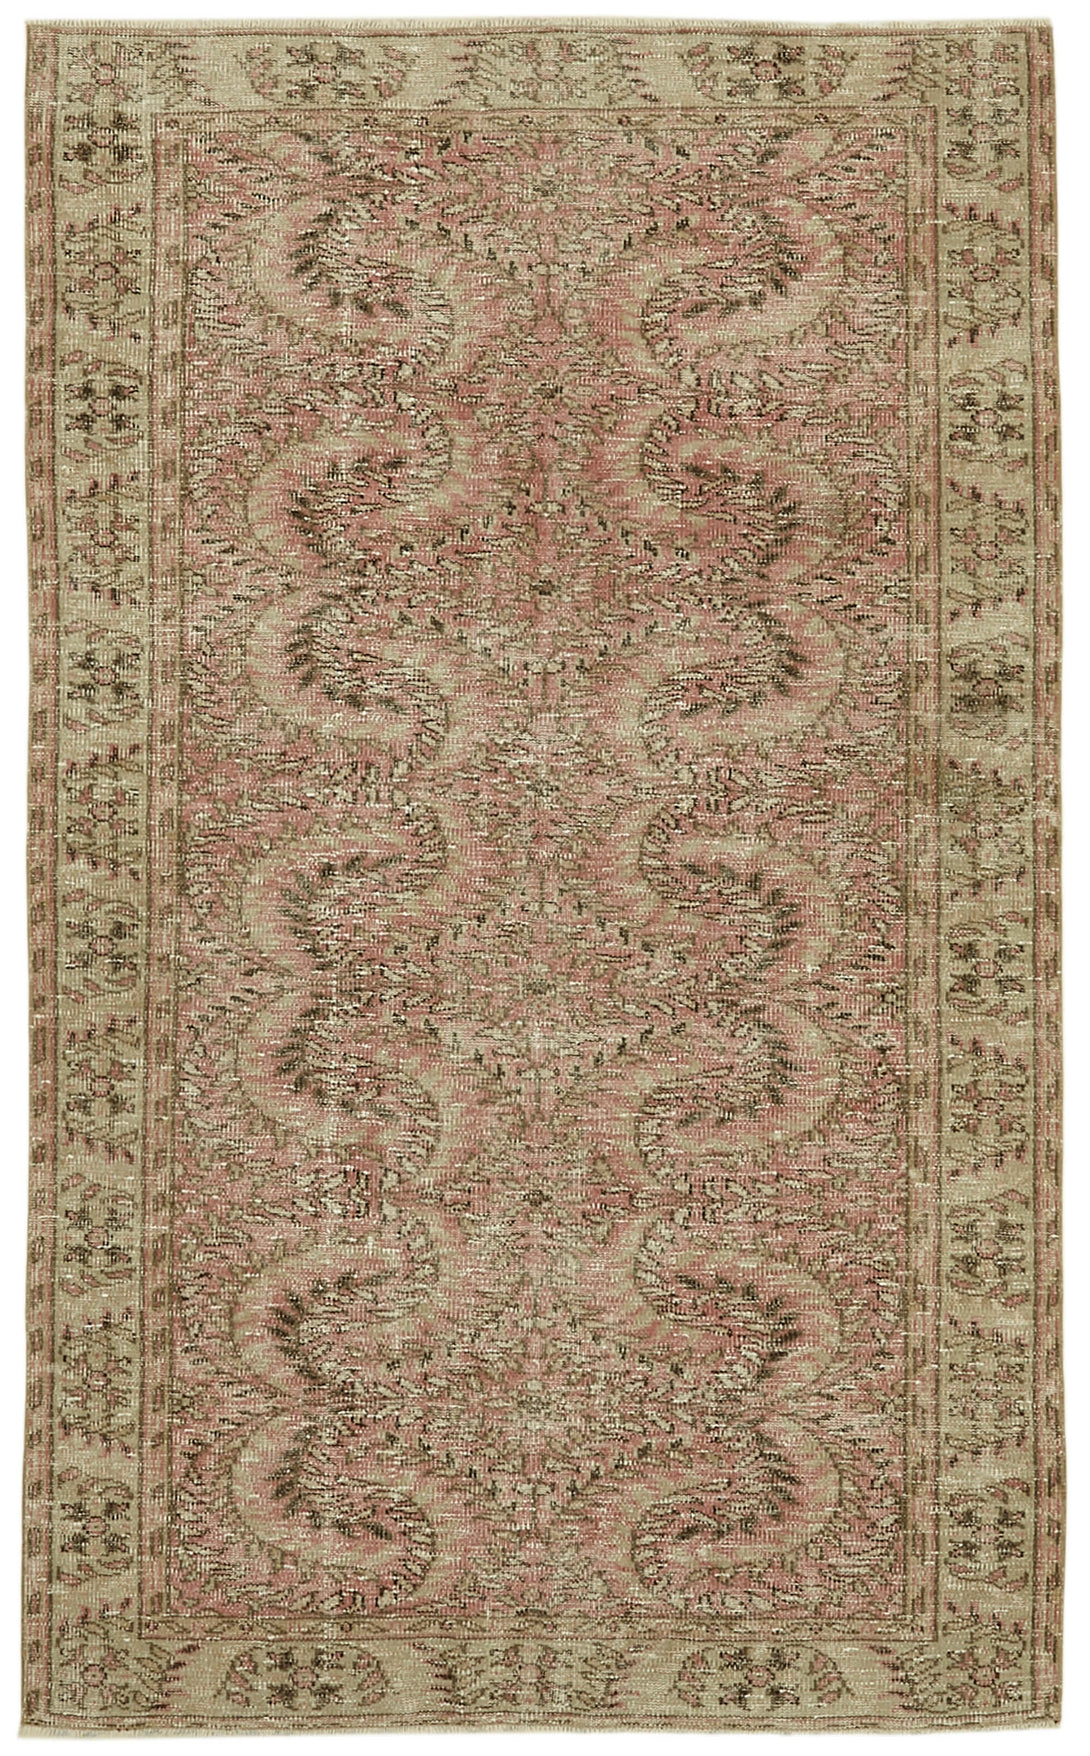 Handmade White Wash Area Rug > Design# OL-AC-41754 > Size: 4'-9" x 7'-10", Carpet Culture Rugs, Handmade Rugs, NYC Rugs, New Rugs, Shop Rugs, Rug Store, Outlet Rugs, SoHo Rugs, Rugs in USA